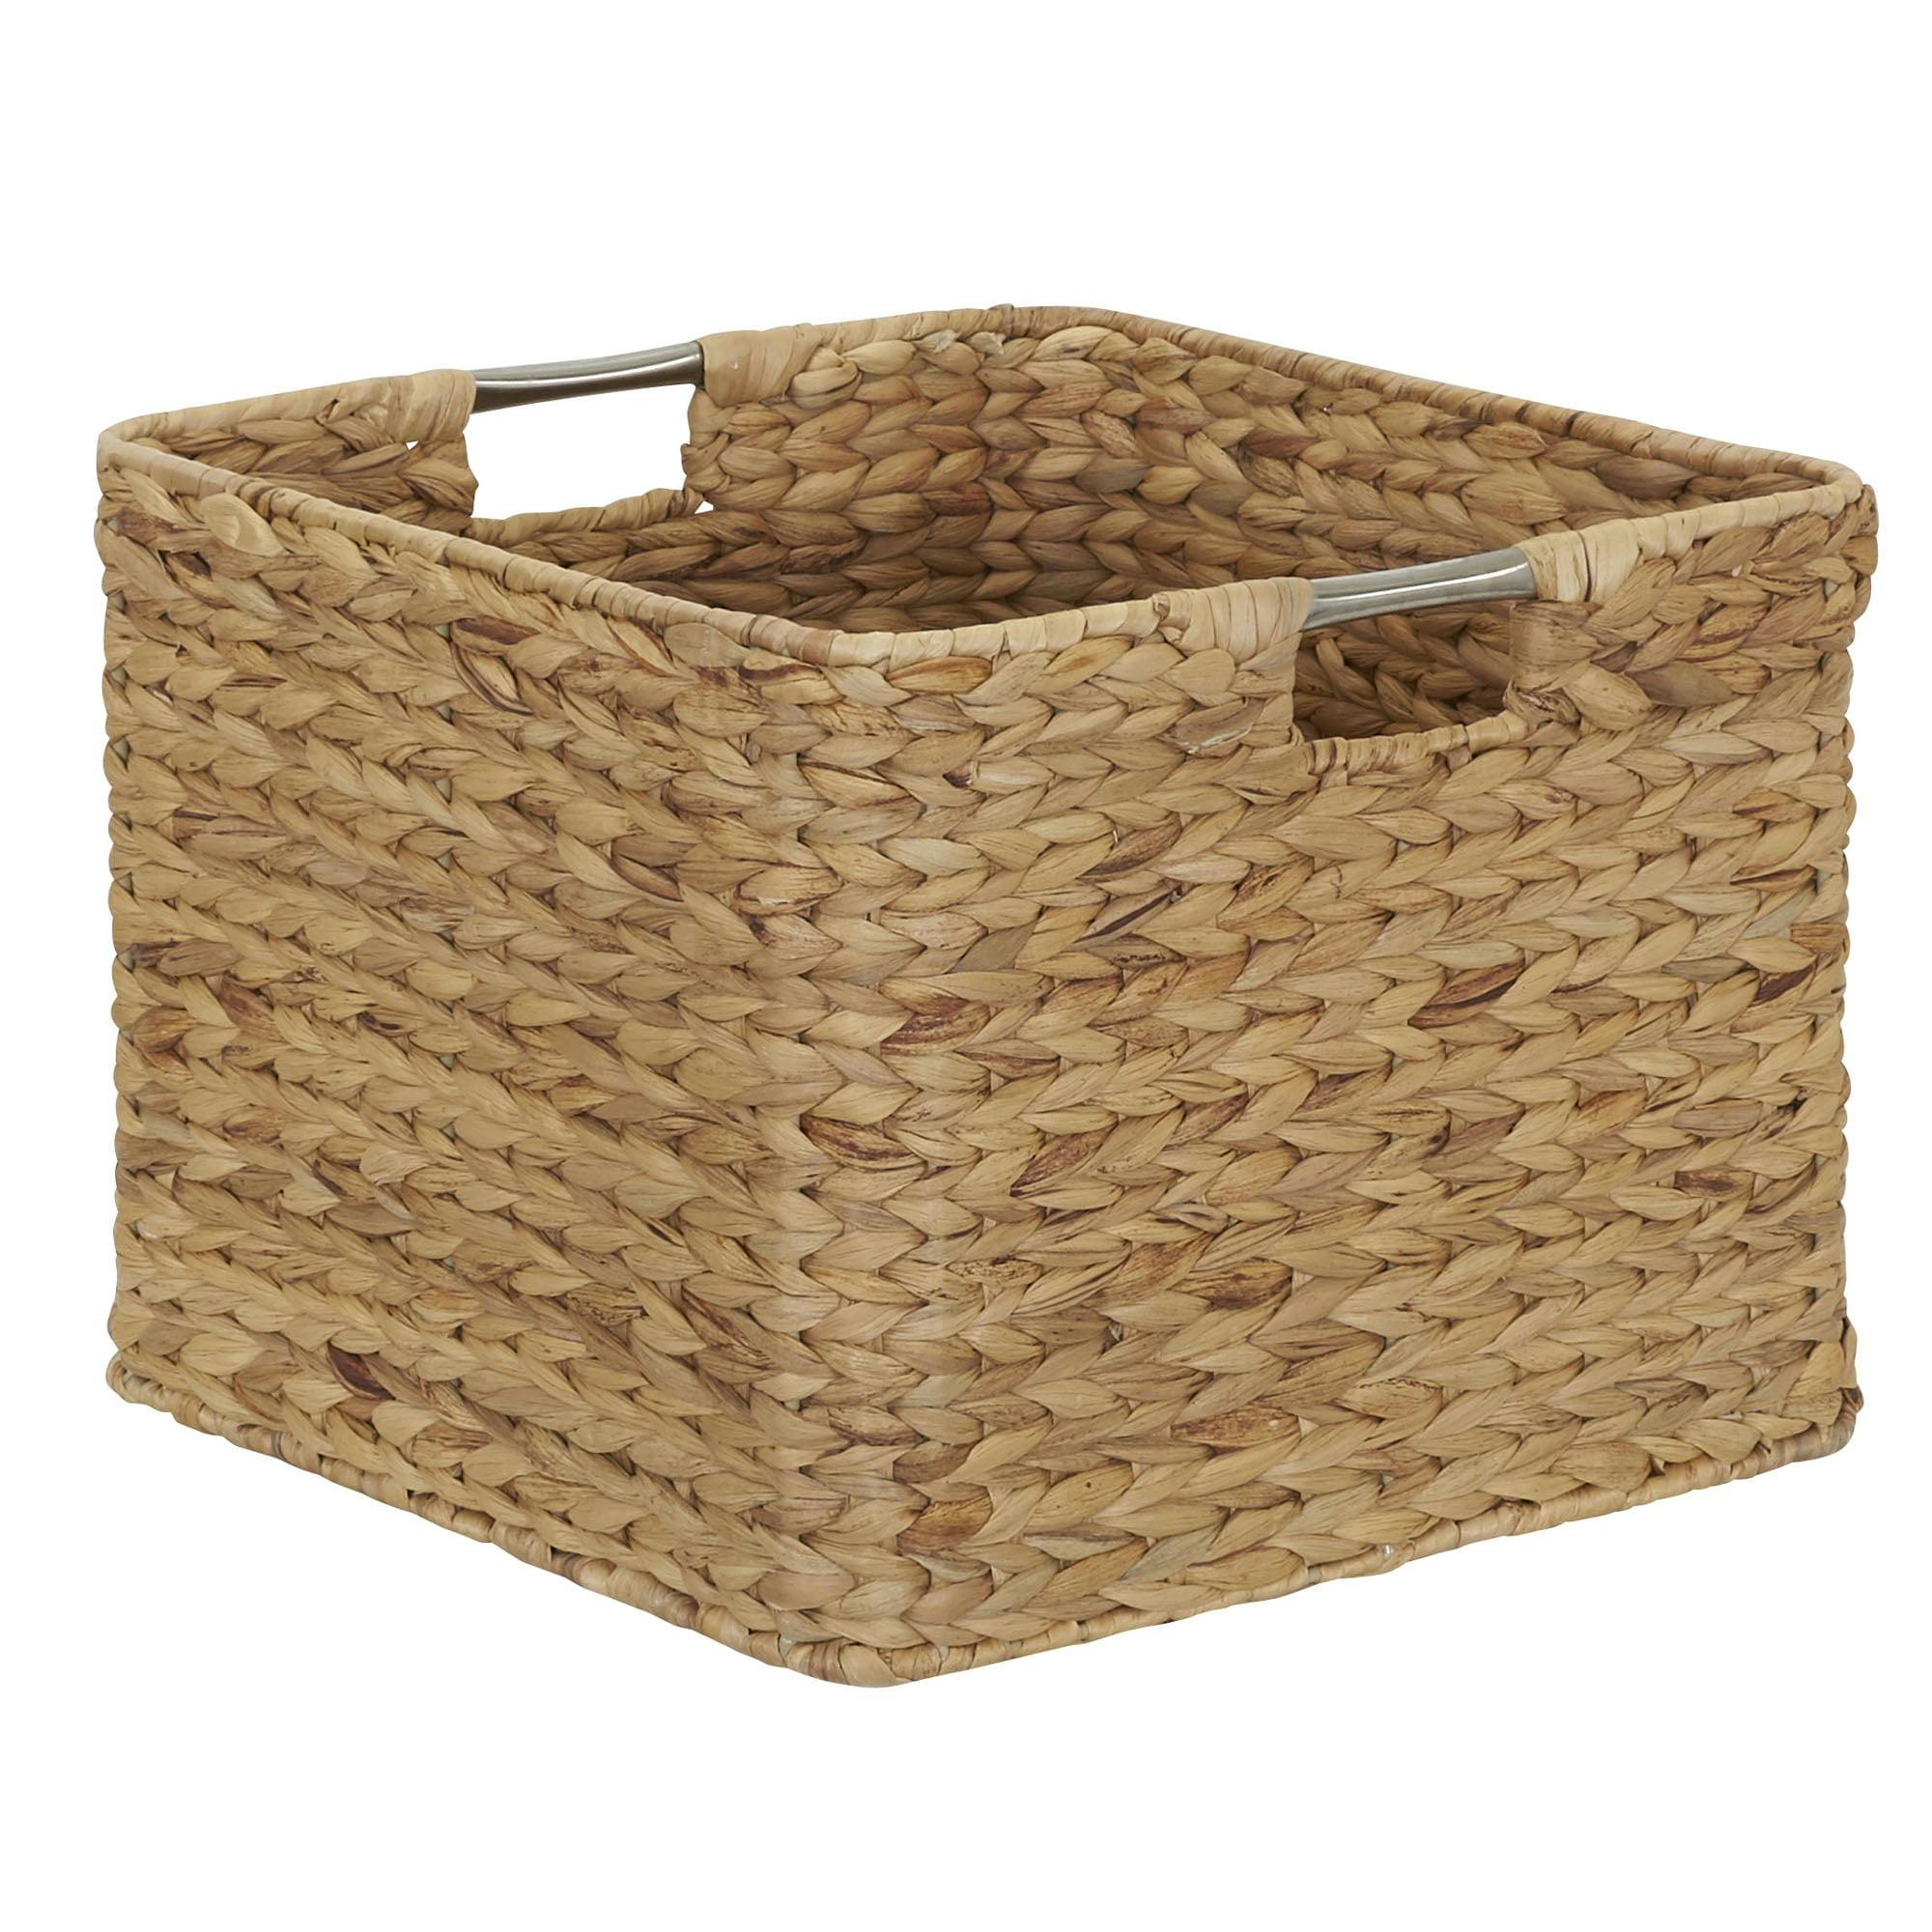 Natural Hyacinth Square Wicker Basket with Stainless Steel Handles